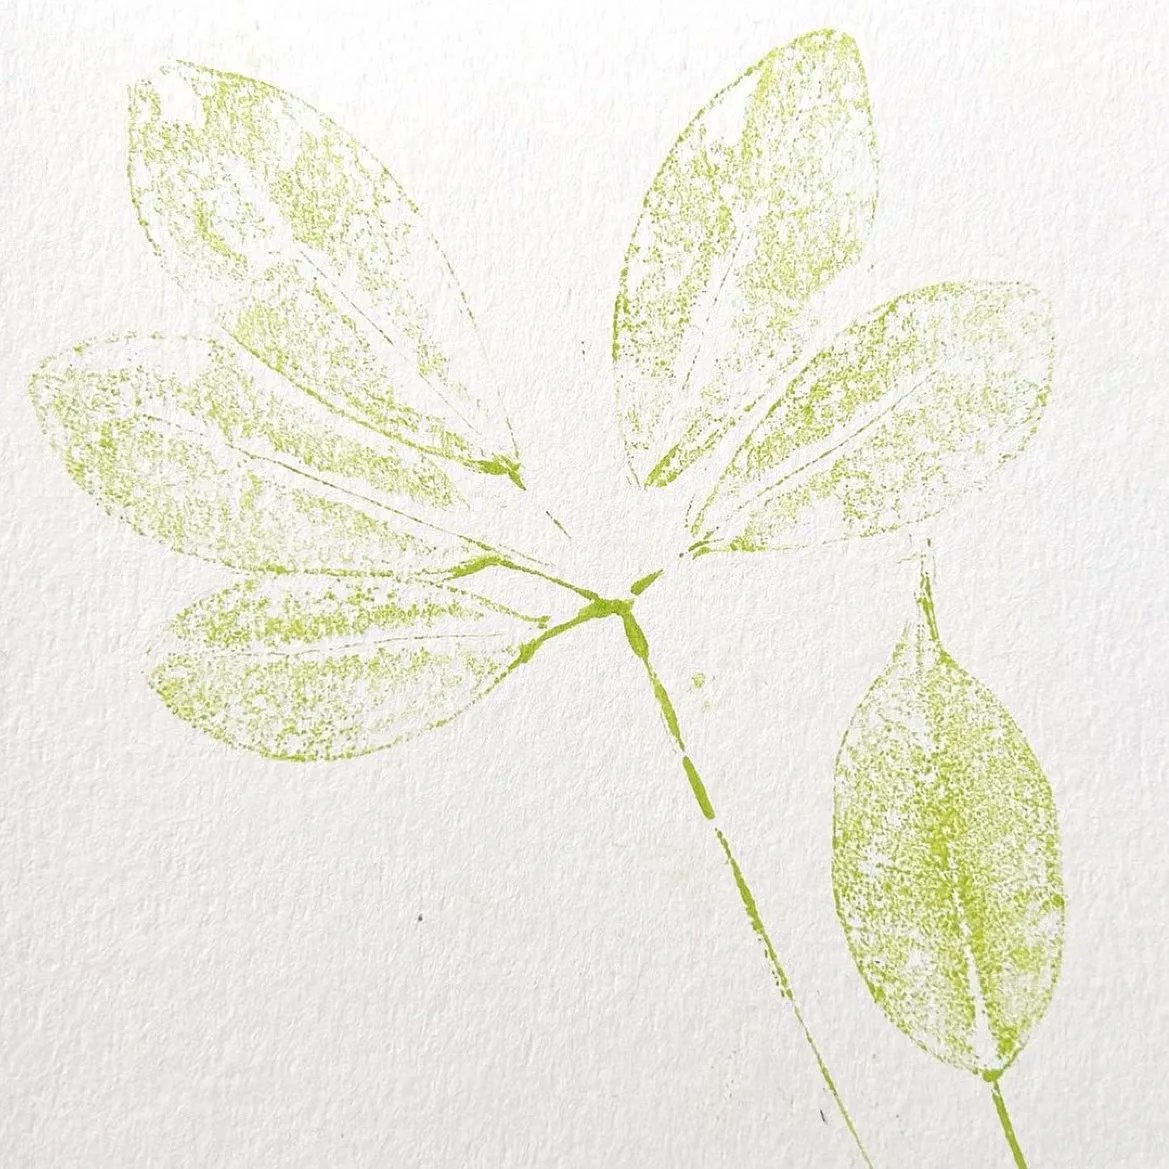 I have been collecting various leaves throughout the year since I did this leaf print last summer.
Not sure whether I should print with them or do some cynotypes? Either way I can't wait to use them x #botanicalprints #dryingleaves #leafprint